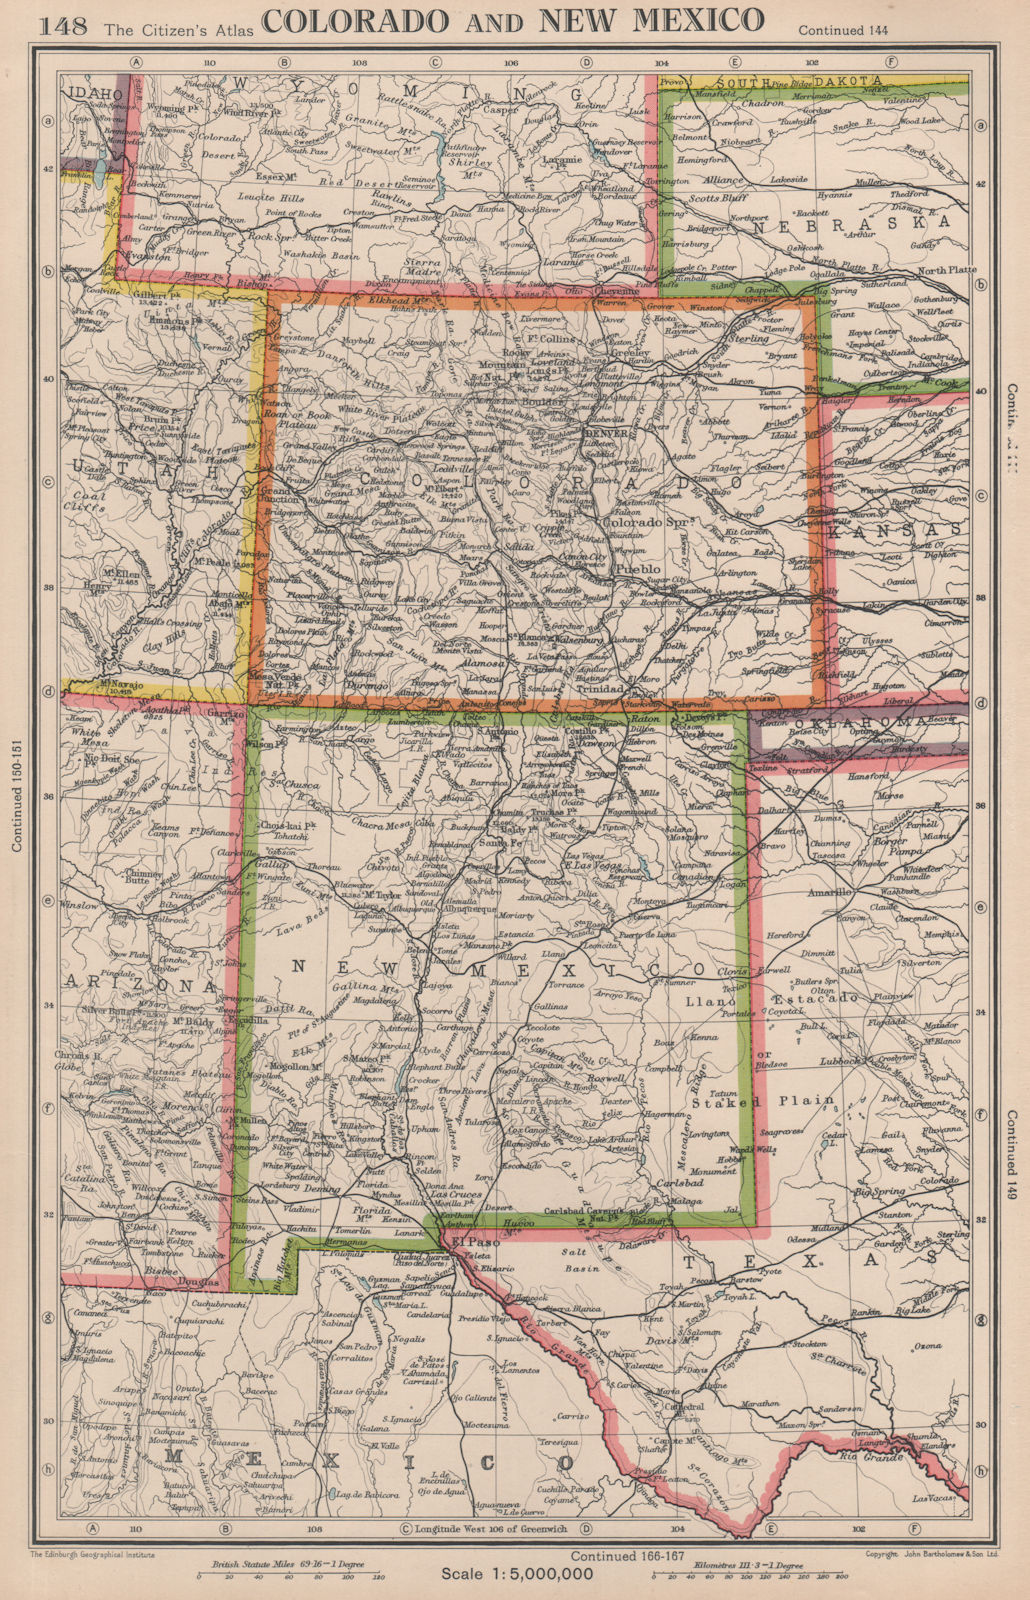 Associate Product COLORADO AND NEW MEXICO. USA state map. BARTHOLOMEW 1944 old vintage chart